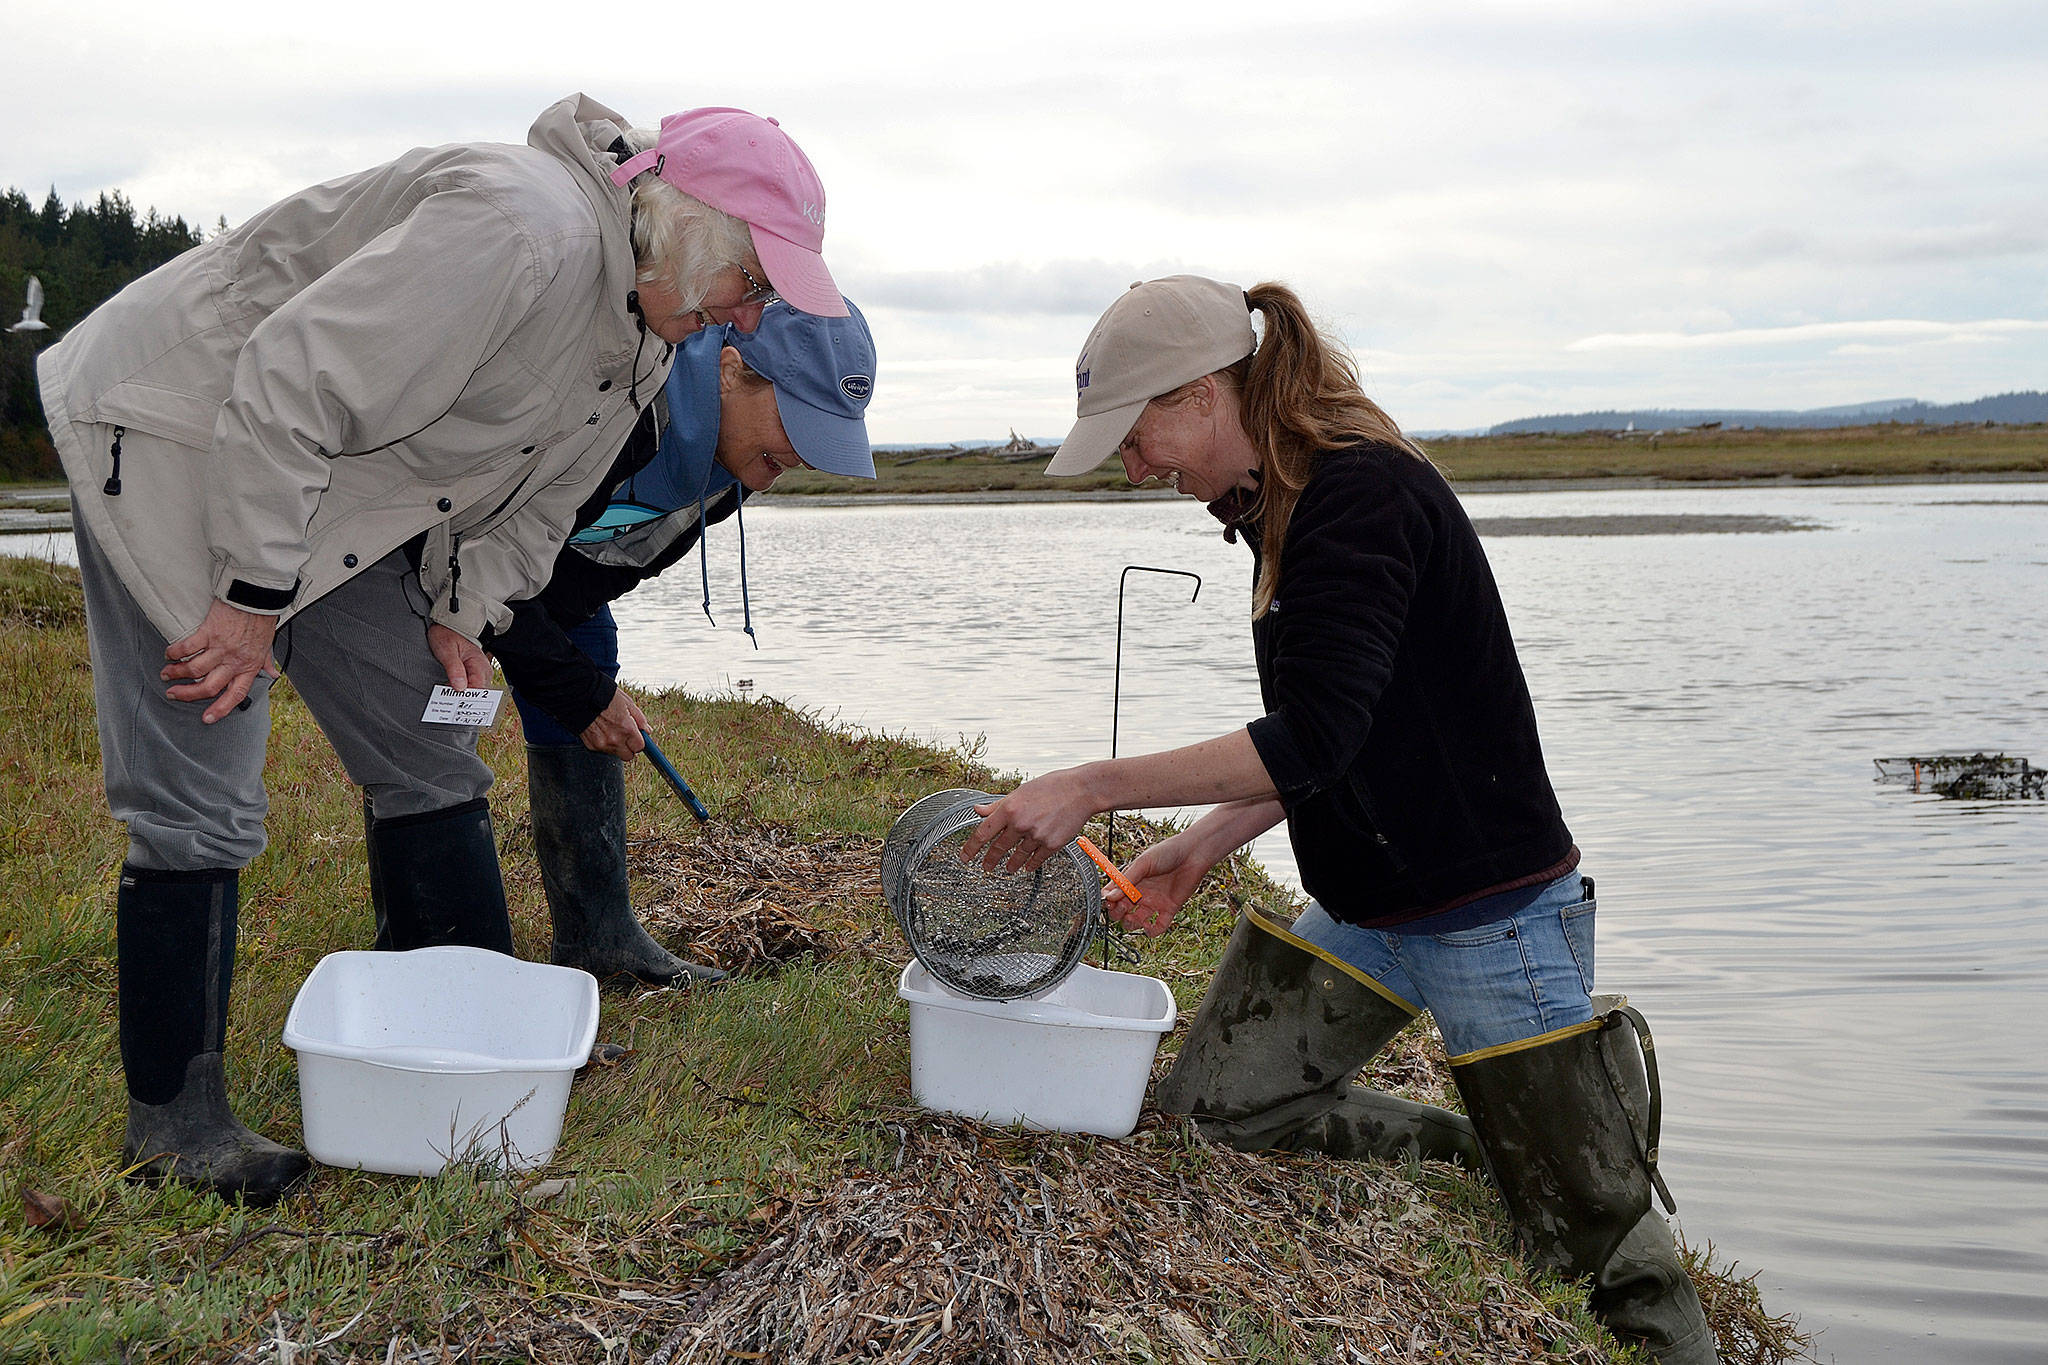 Volunteers Amy Does, left, and Andrea Carlson assist Emily Grason, Crab Team program manager and a marine ecologist, sort crabs while seeking European green crabs at Indian Island County Park near Port Hadlock. (Matthew Nash/Olympic Peninsula News Group)